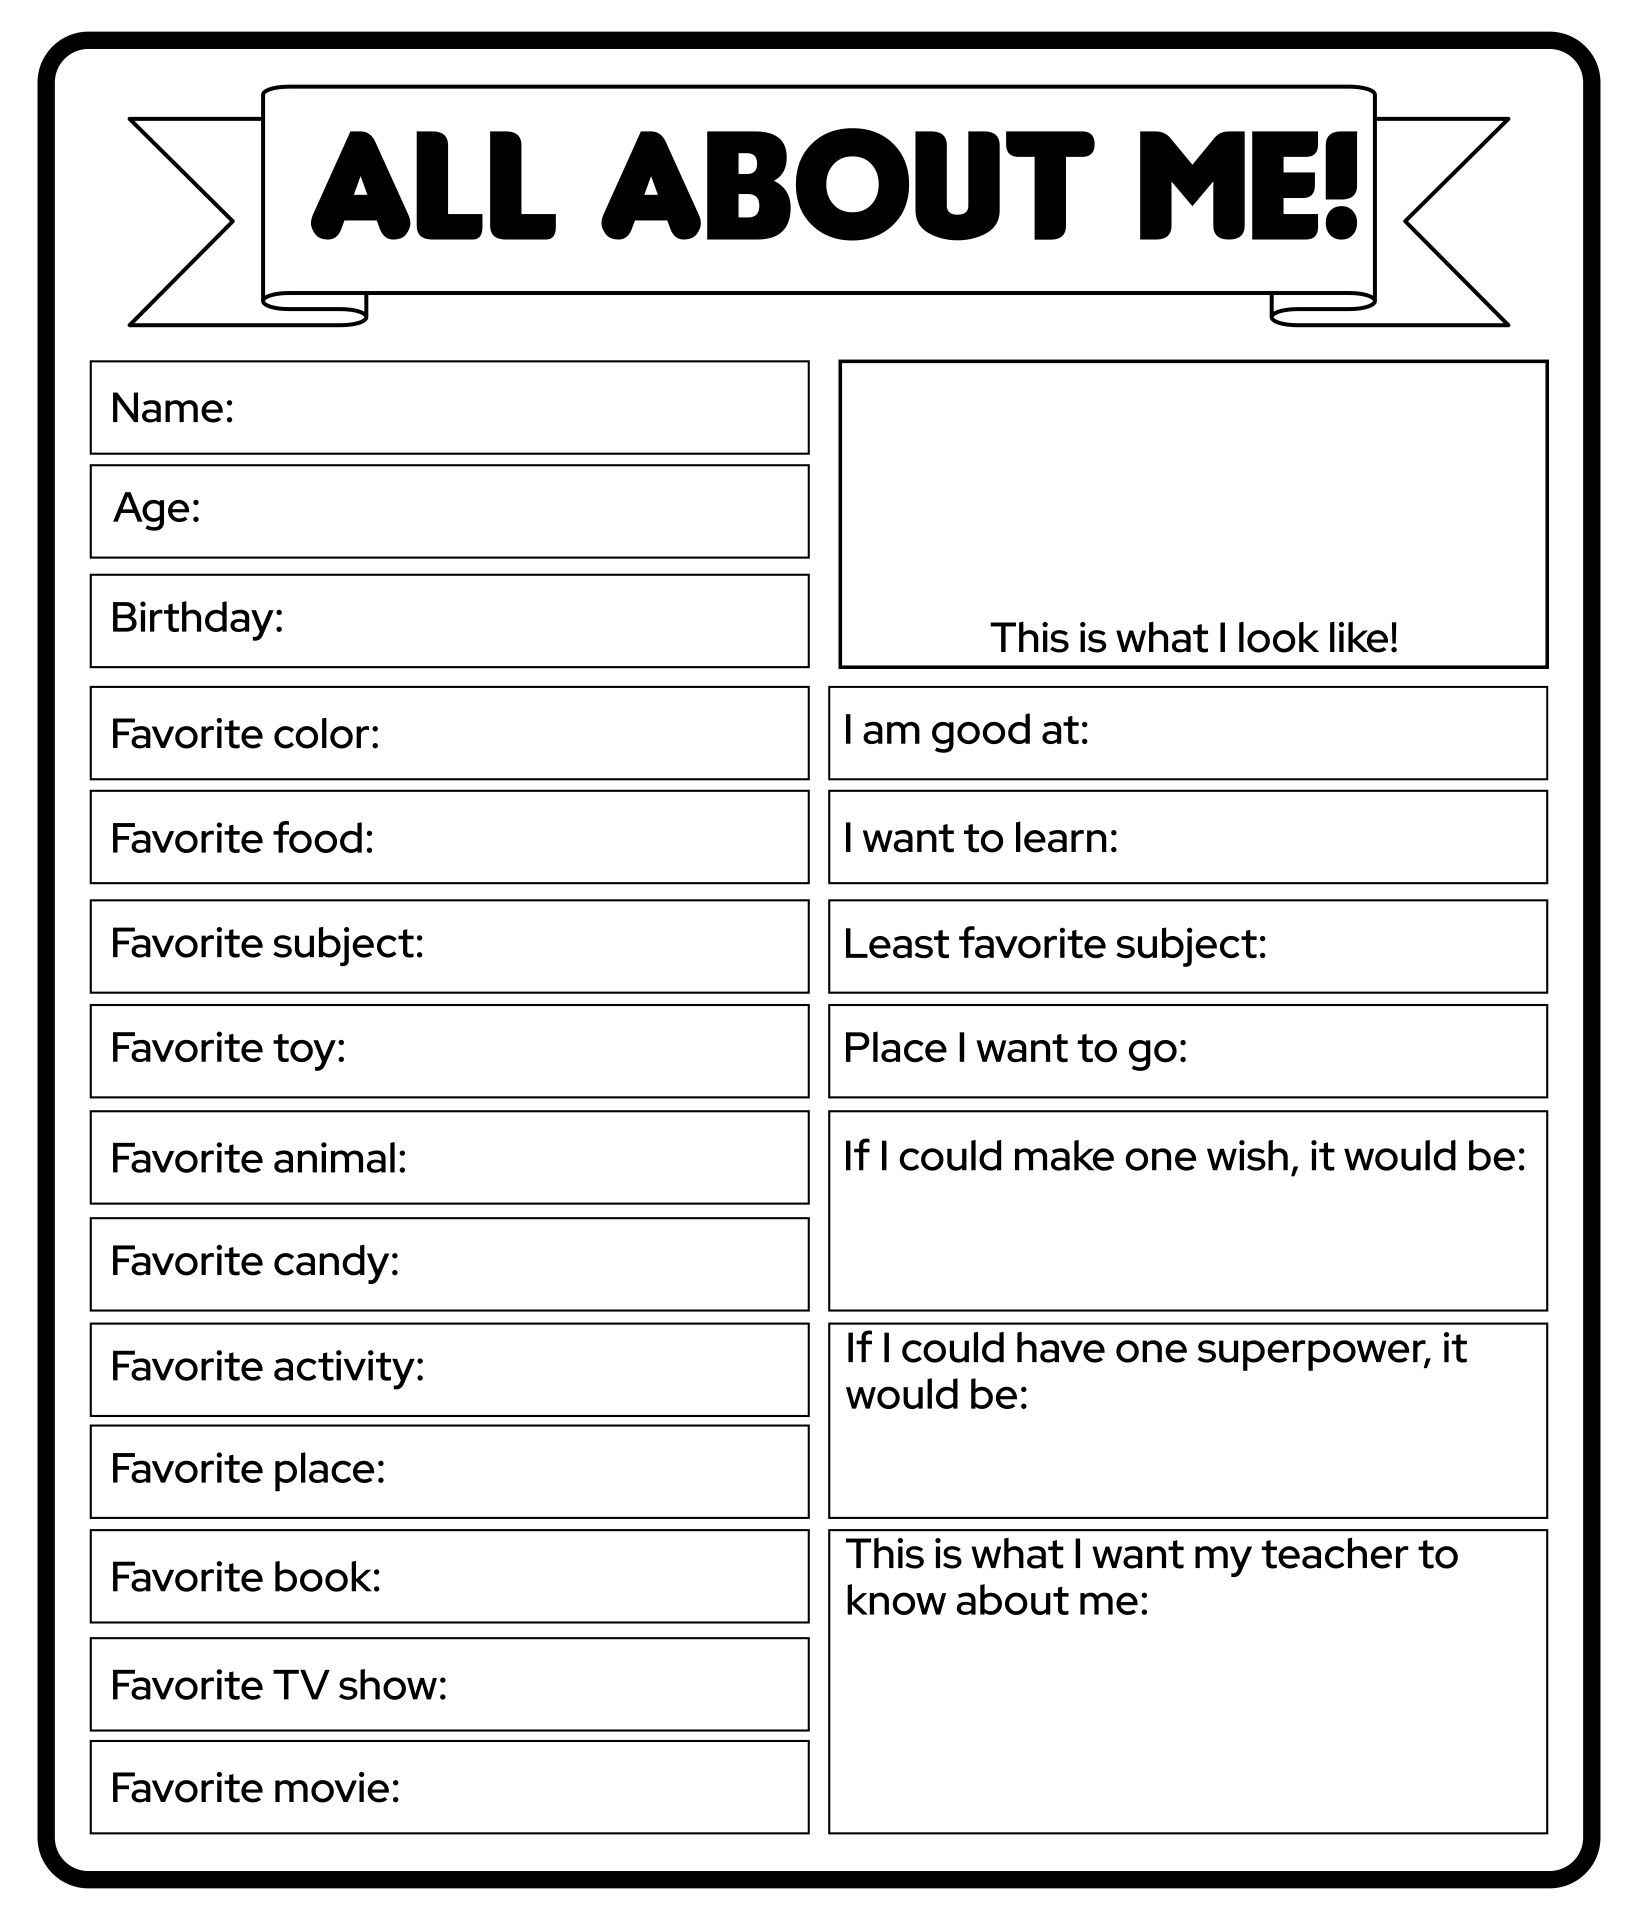 all-about-me-page-for-adults